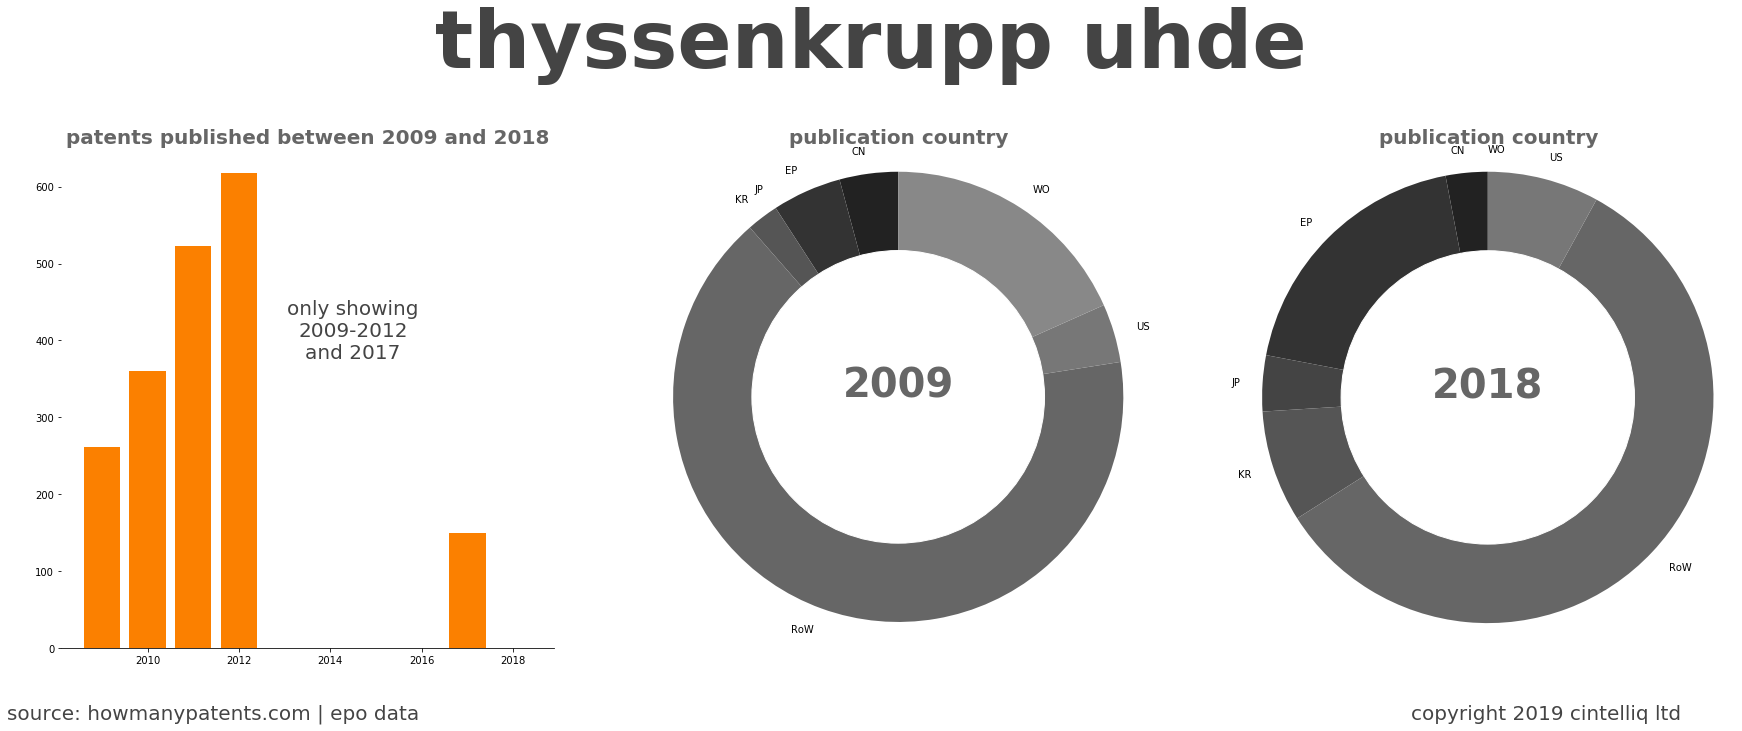 summary of patents for Thyssenkrupp Uhde